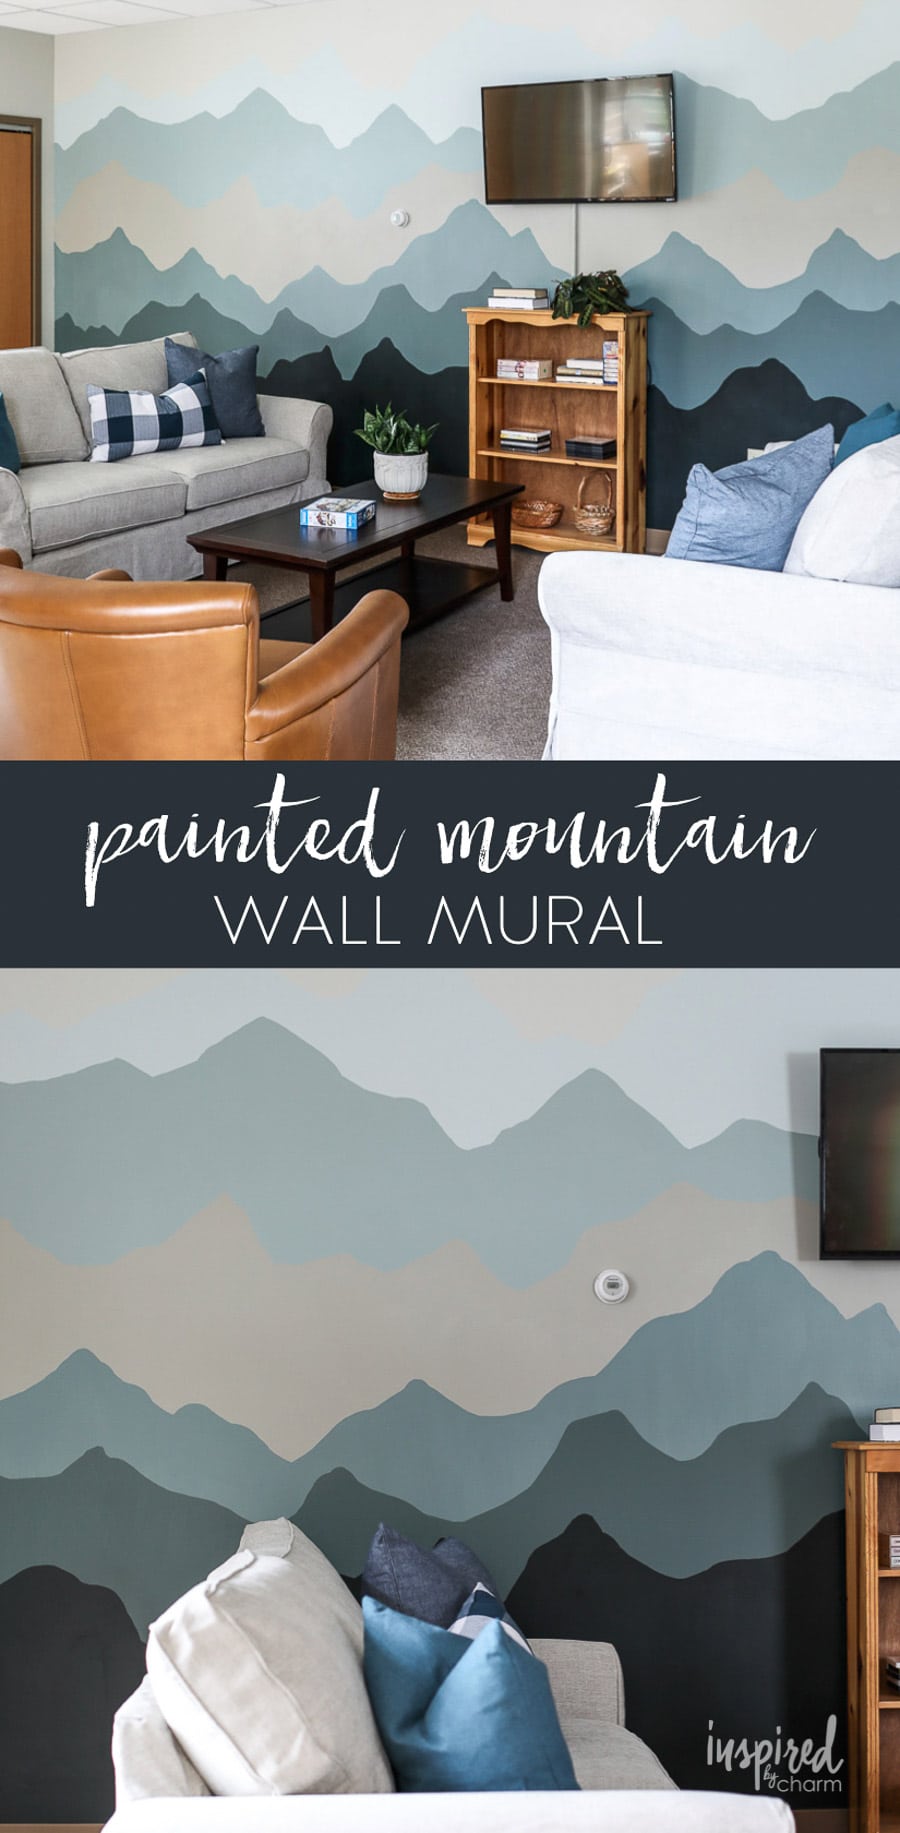 Painted Mountain Wall Mural - Before and After Senior Center Makeover #swpaintingweek #makeover #mountain #mural #painting